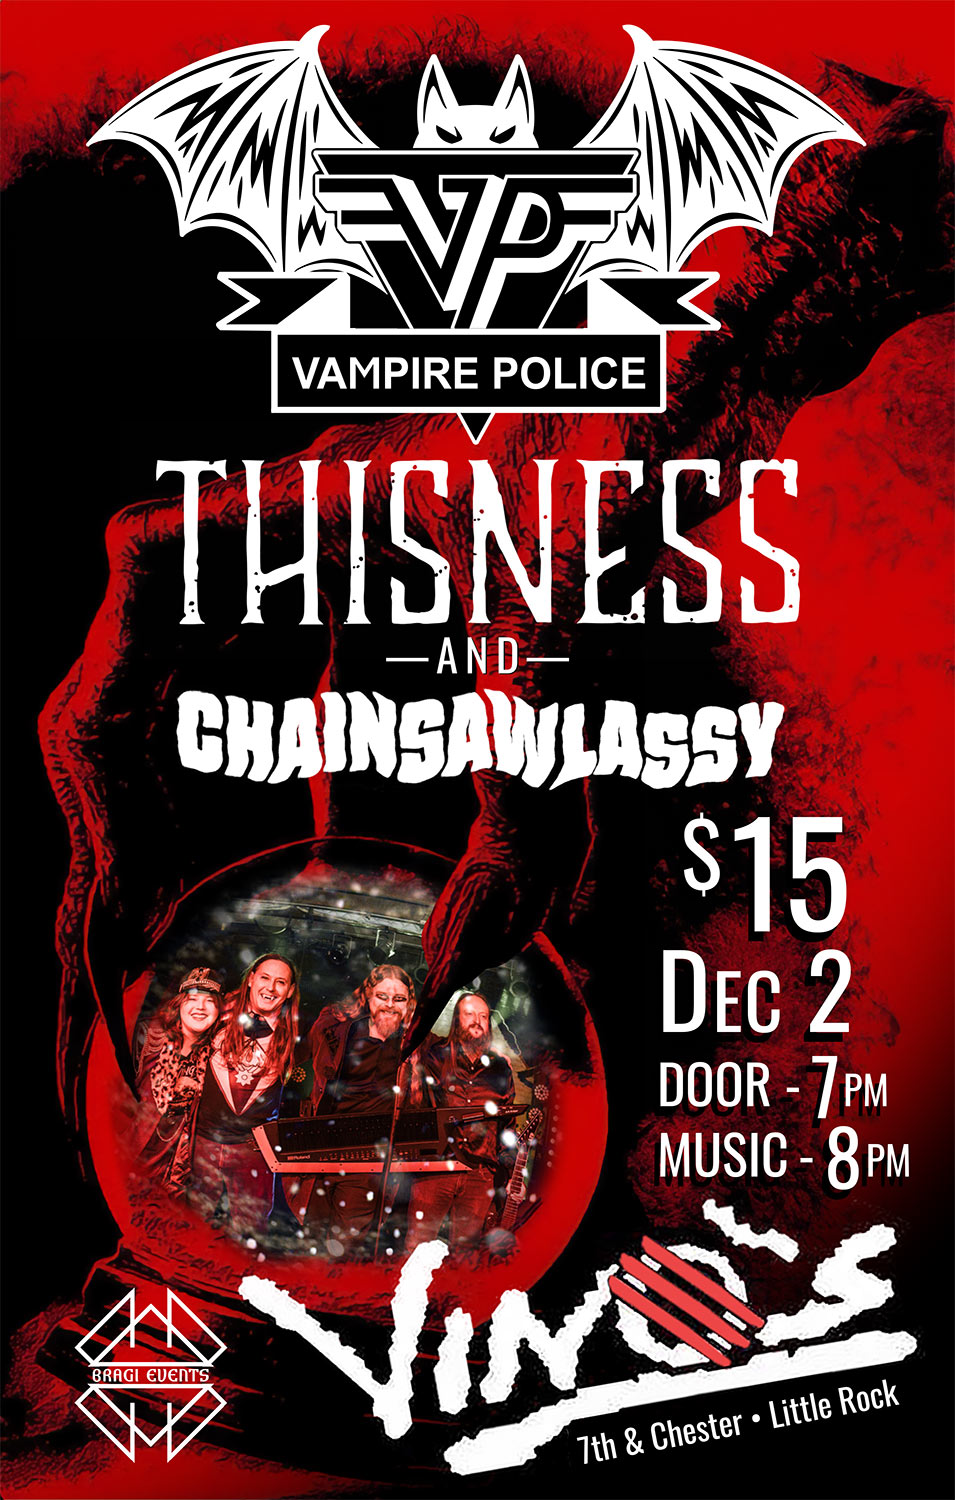 Vampire Police Dec 2nd Flyer with Thisness and Chainsaw Lassy